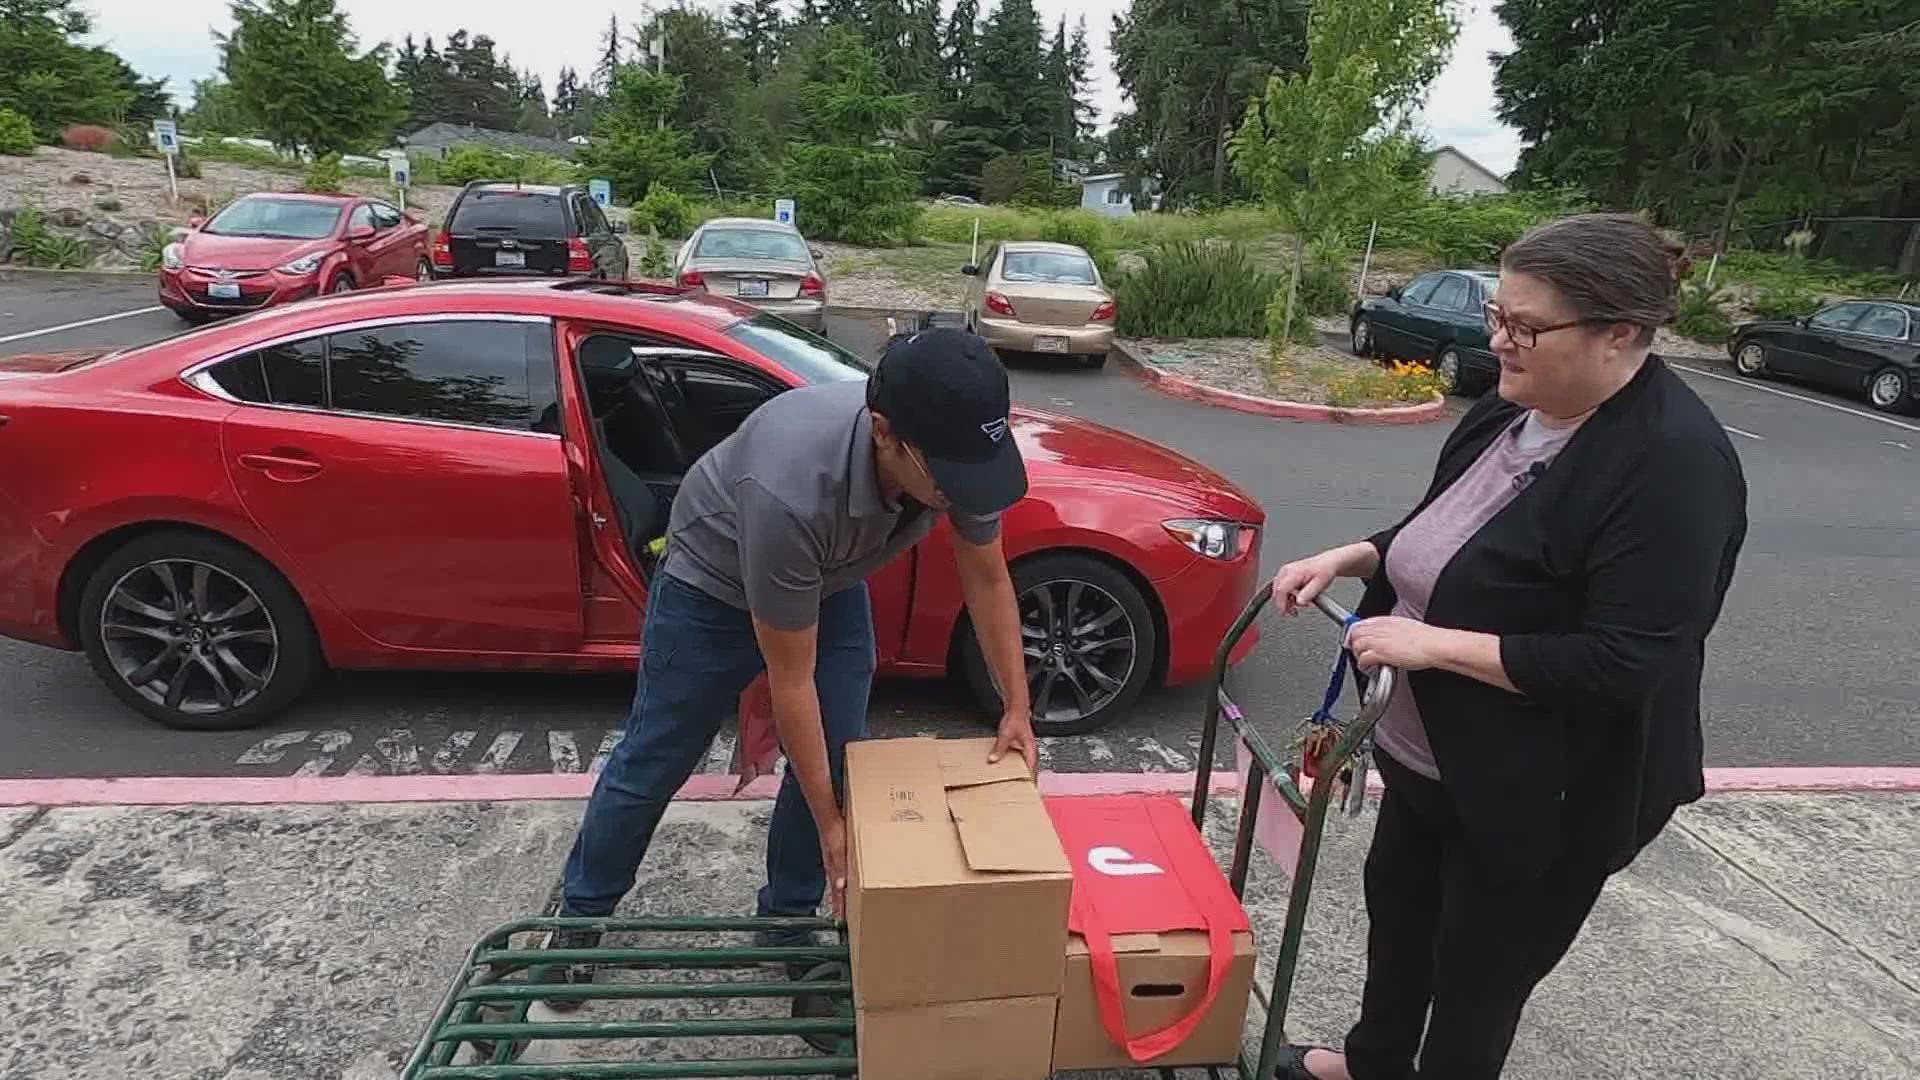 The nationwide program Project Dash, which is called United Way home grocery delivery locally, connects low-income households to food assistance.